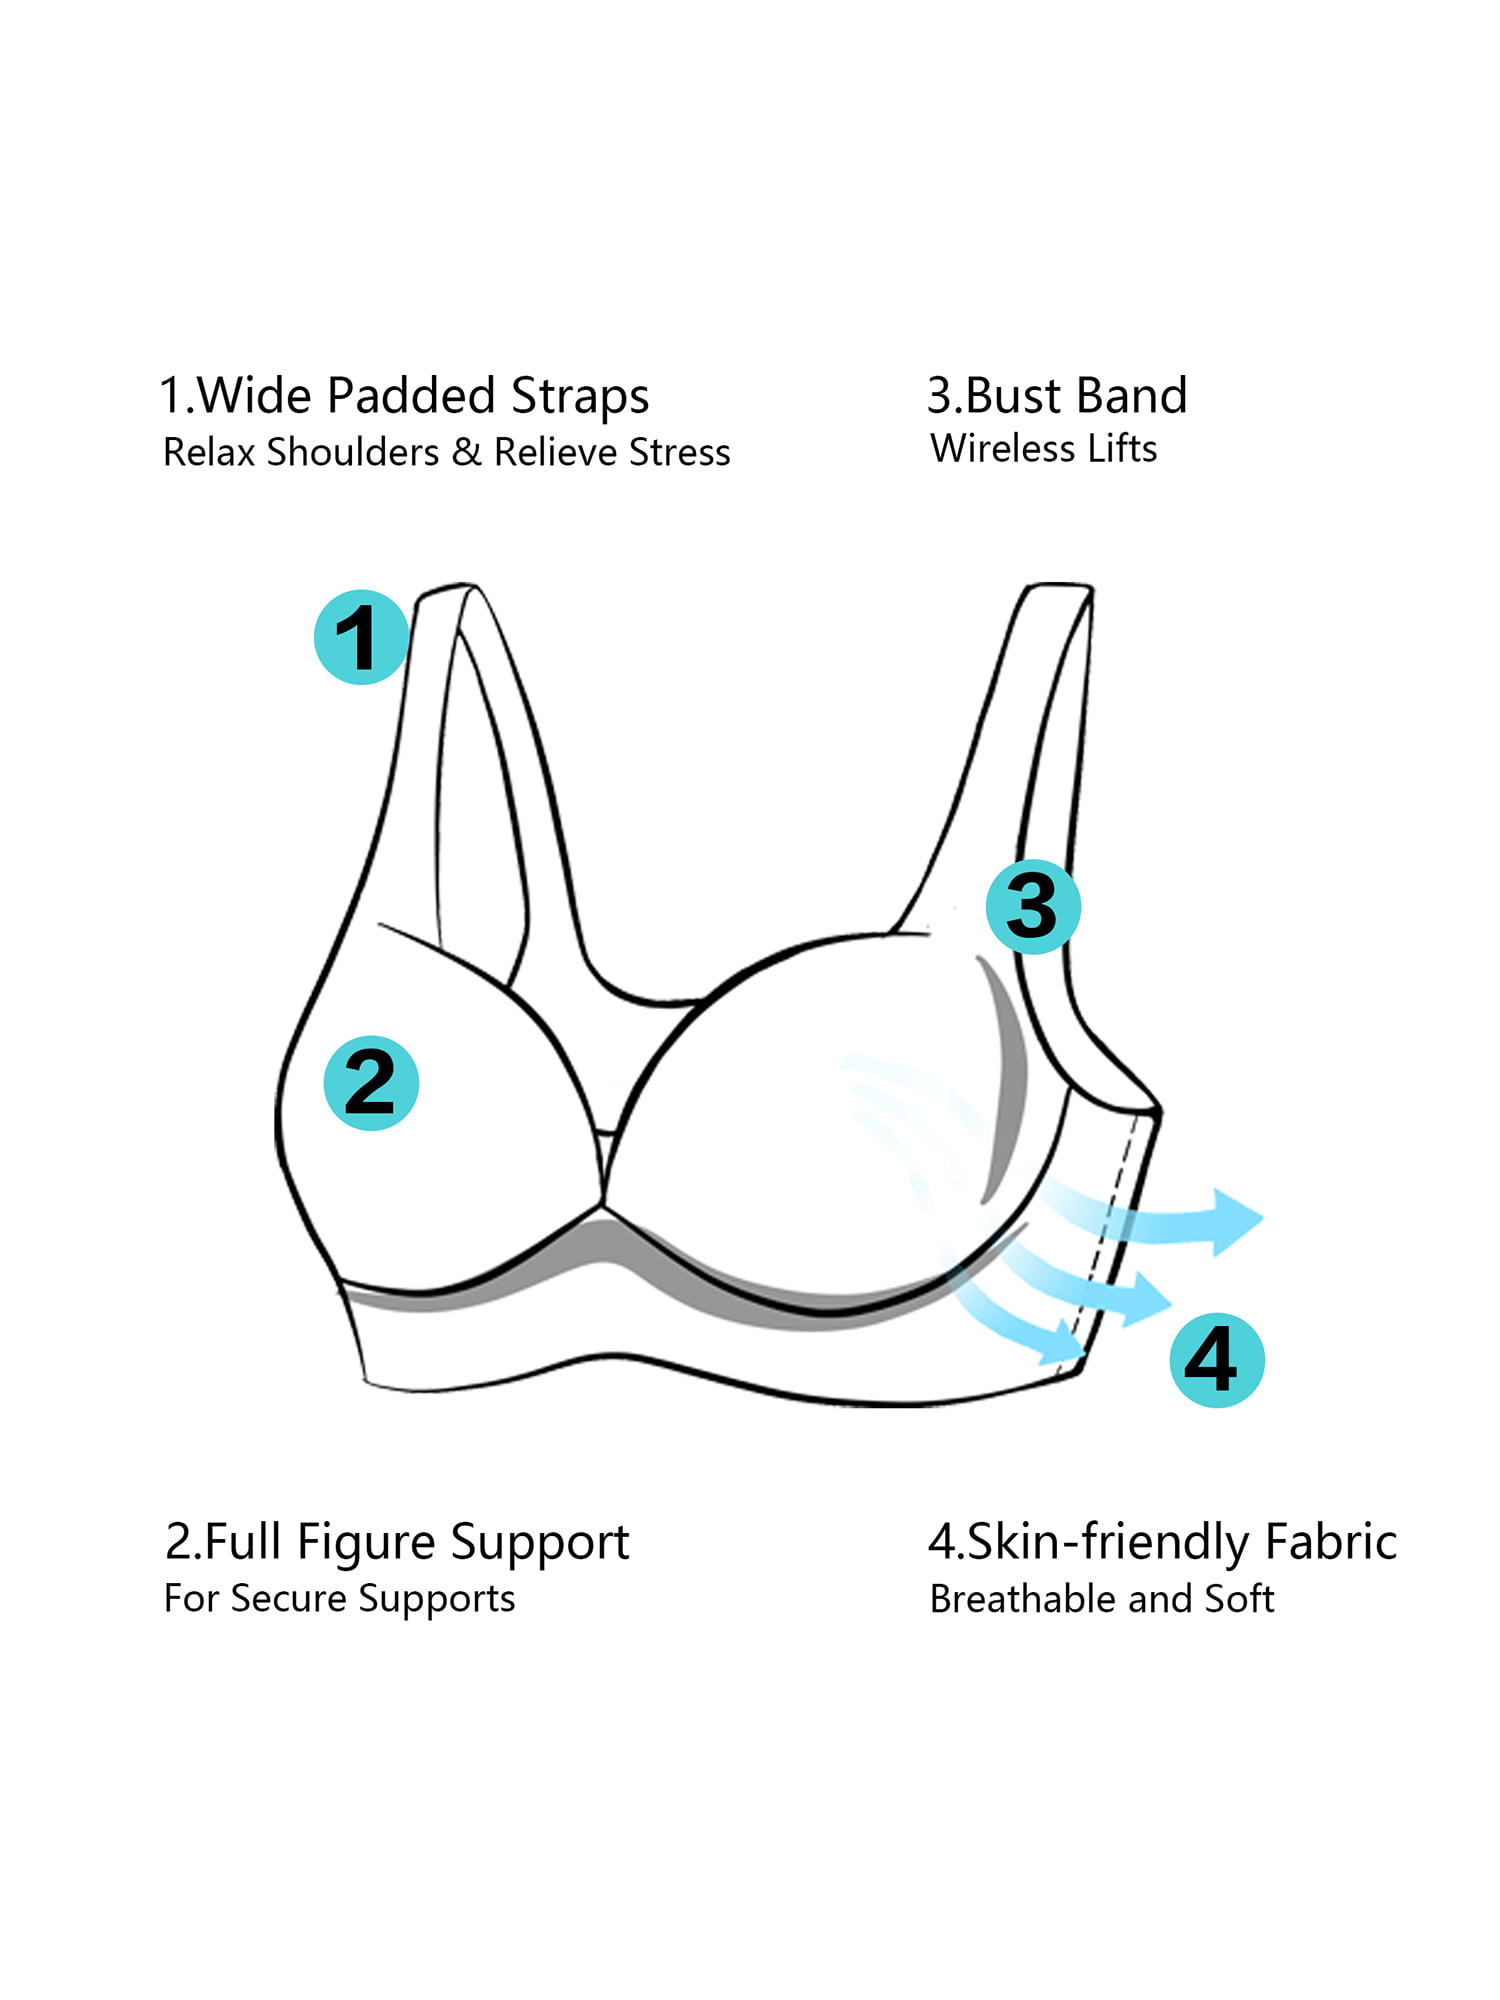 Push Up Bras for Womenâ€˜s Full Coverage Comfort Wirefree Lift